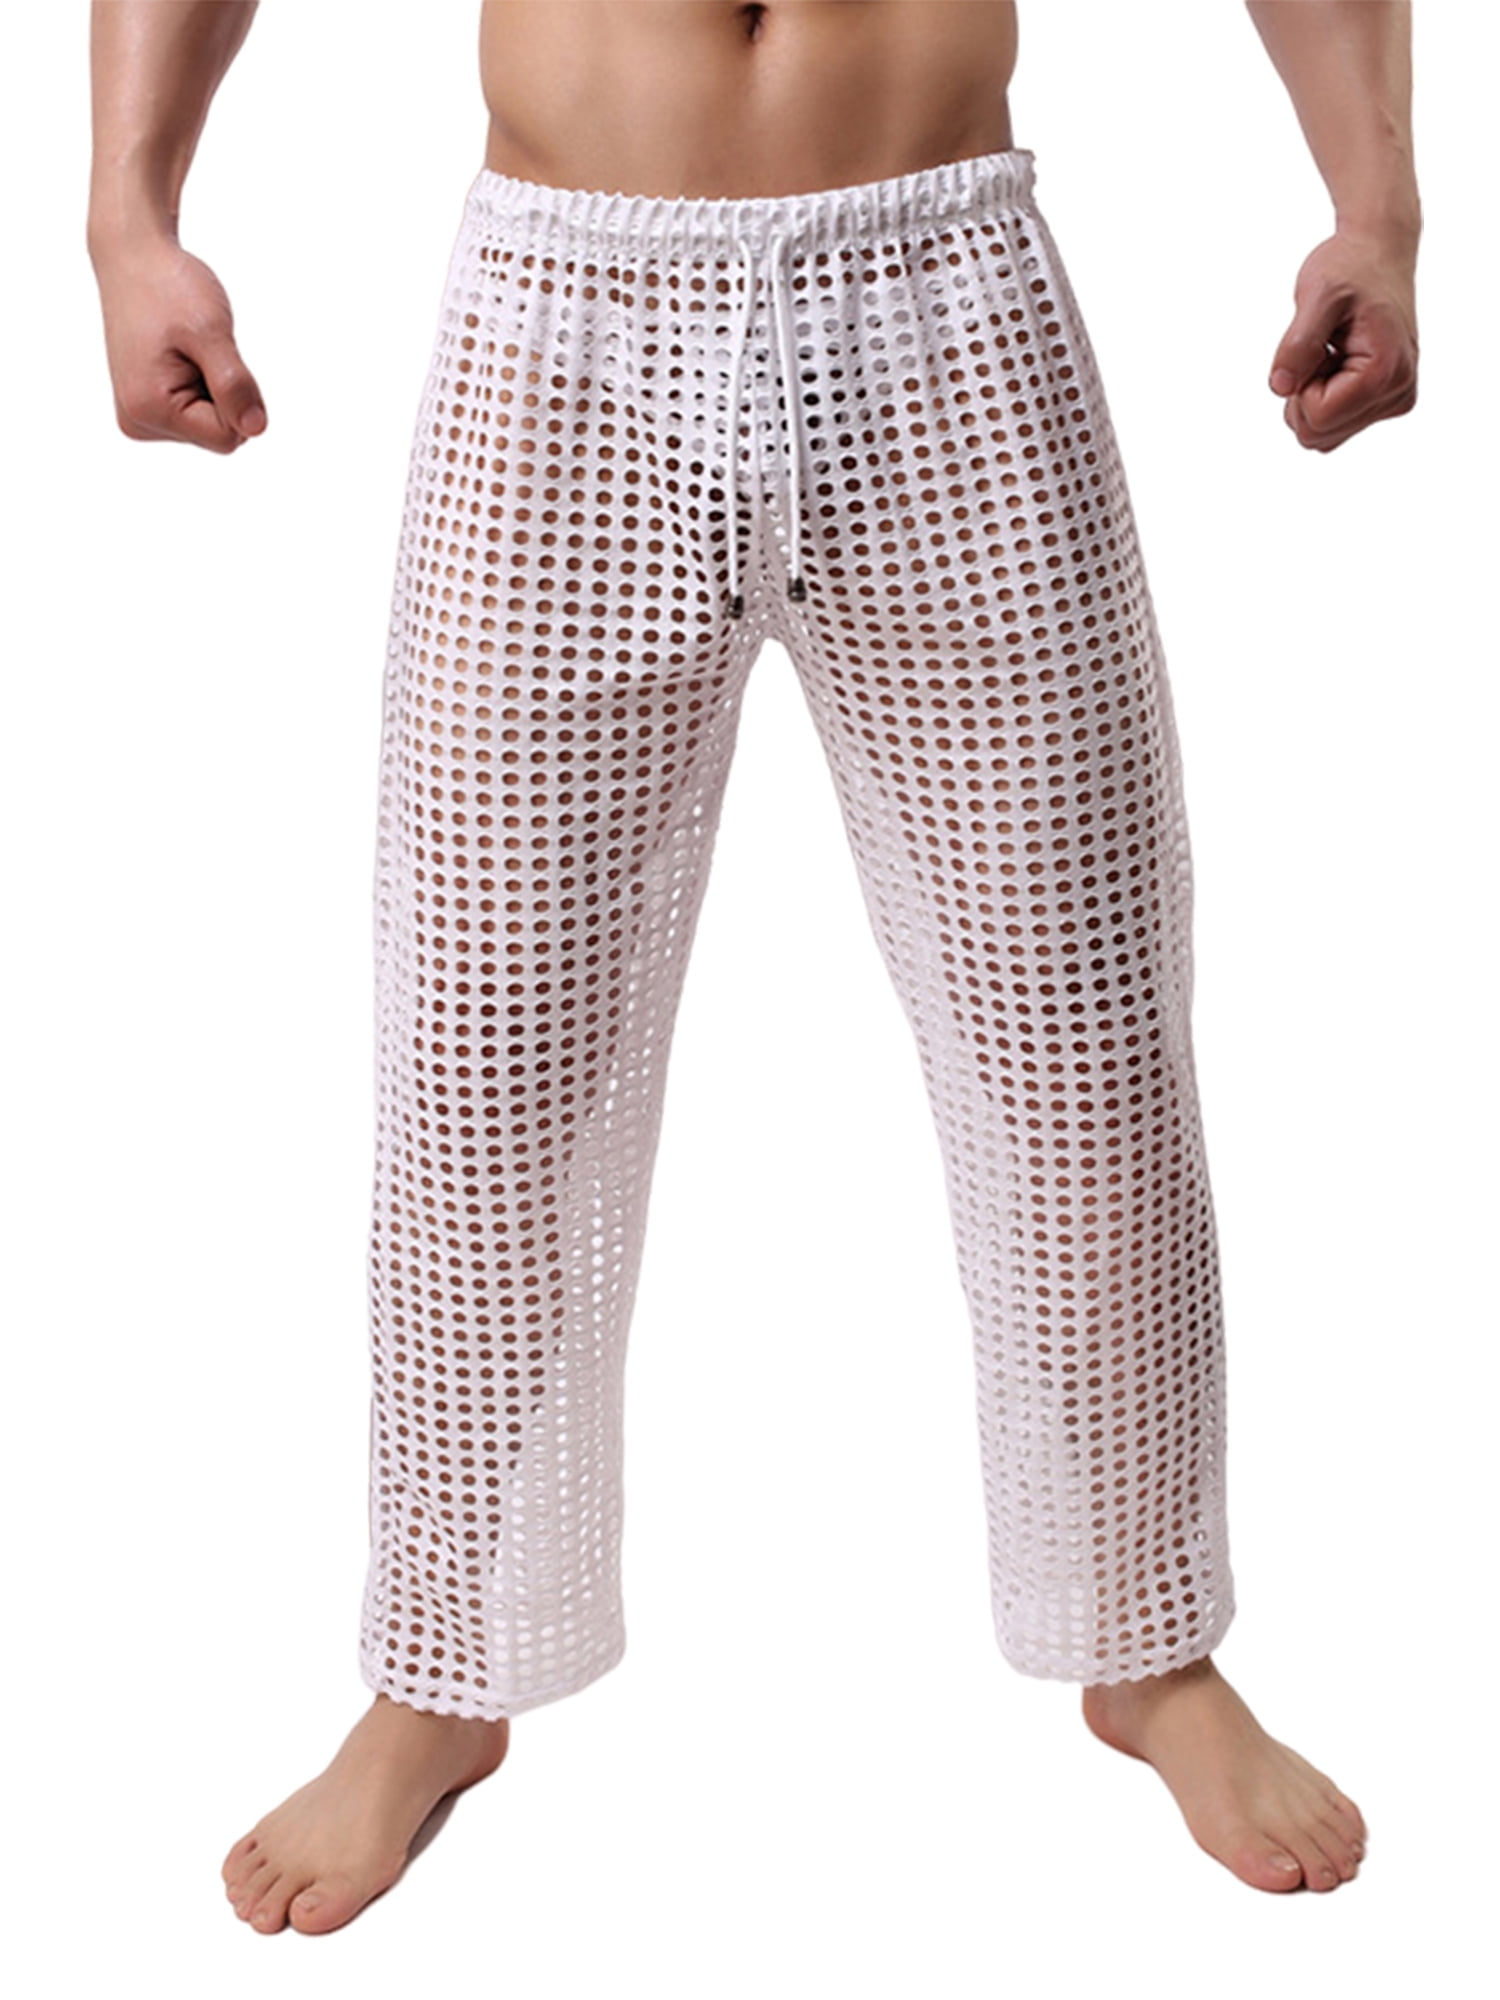 see through mens trousers Off 64%